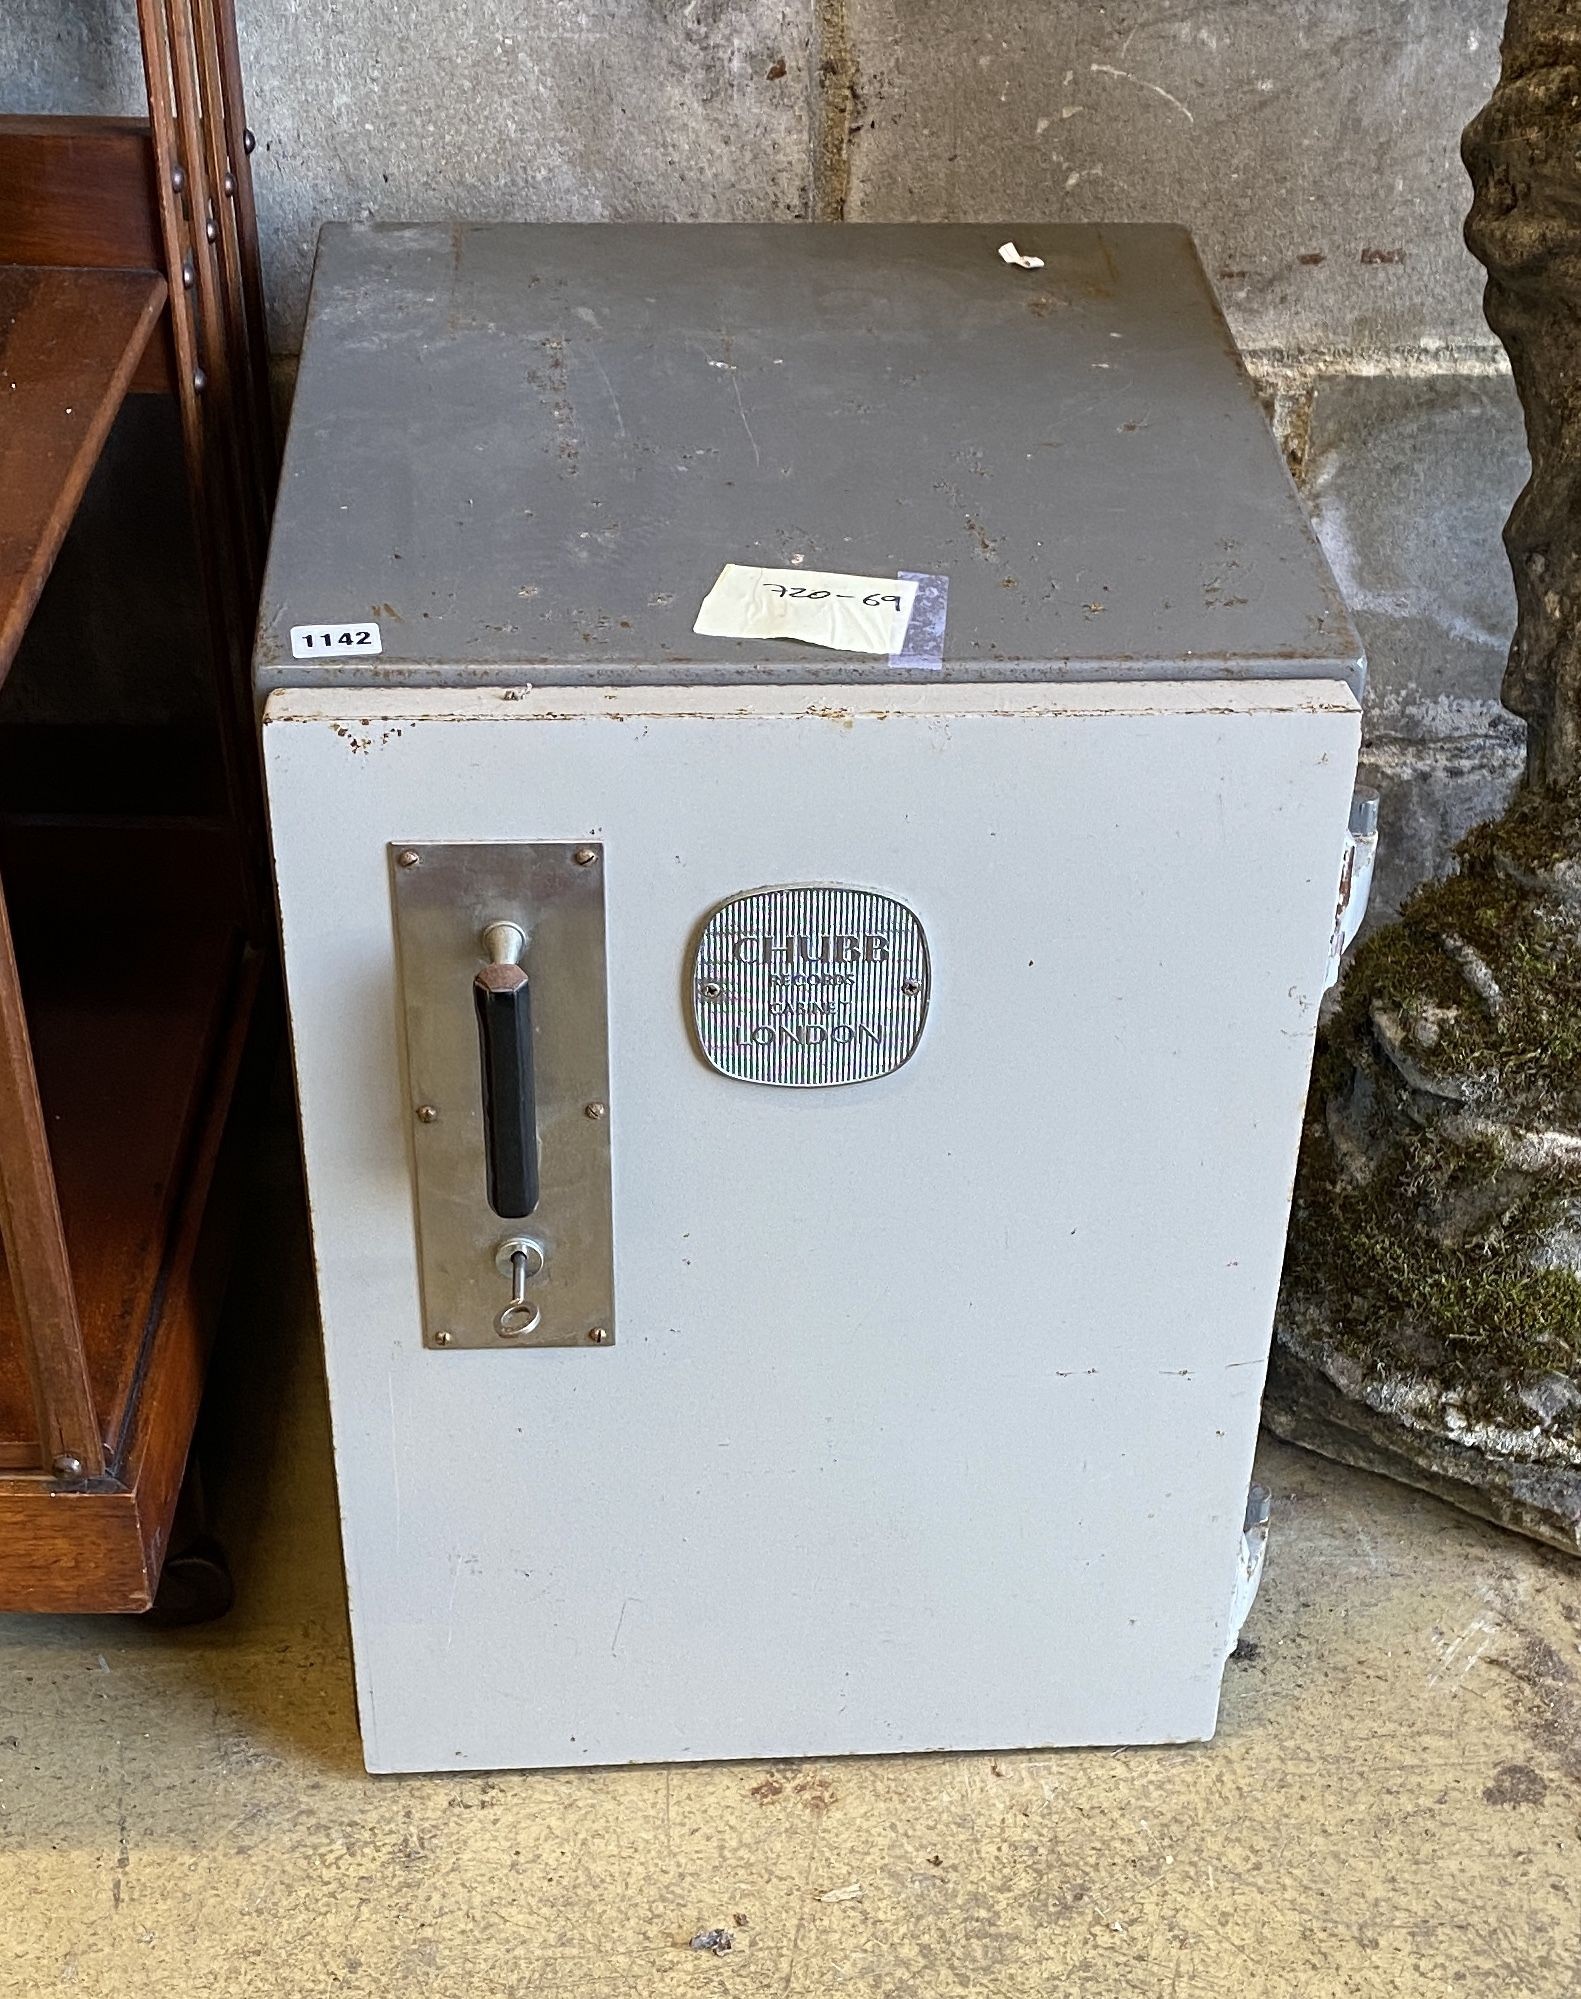 A Chubb ‘Record Safe’ with key, width 41cm, depth 46cm, height 56cm